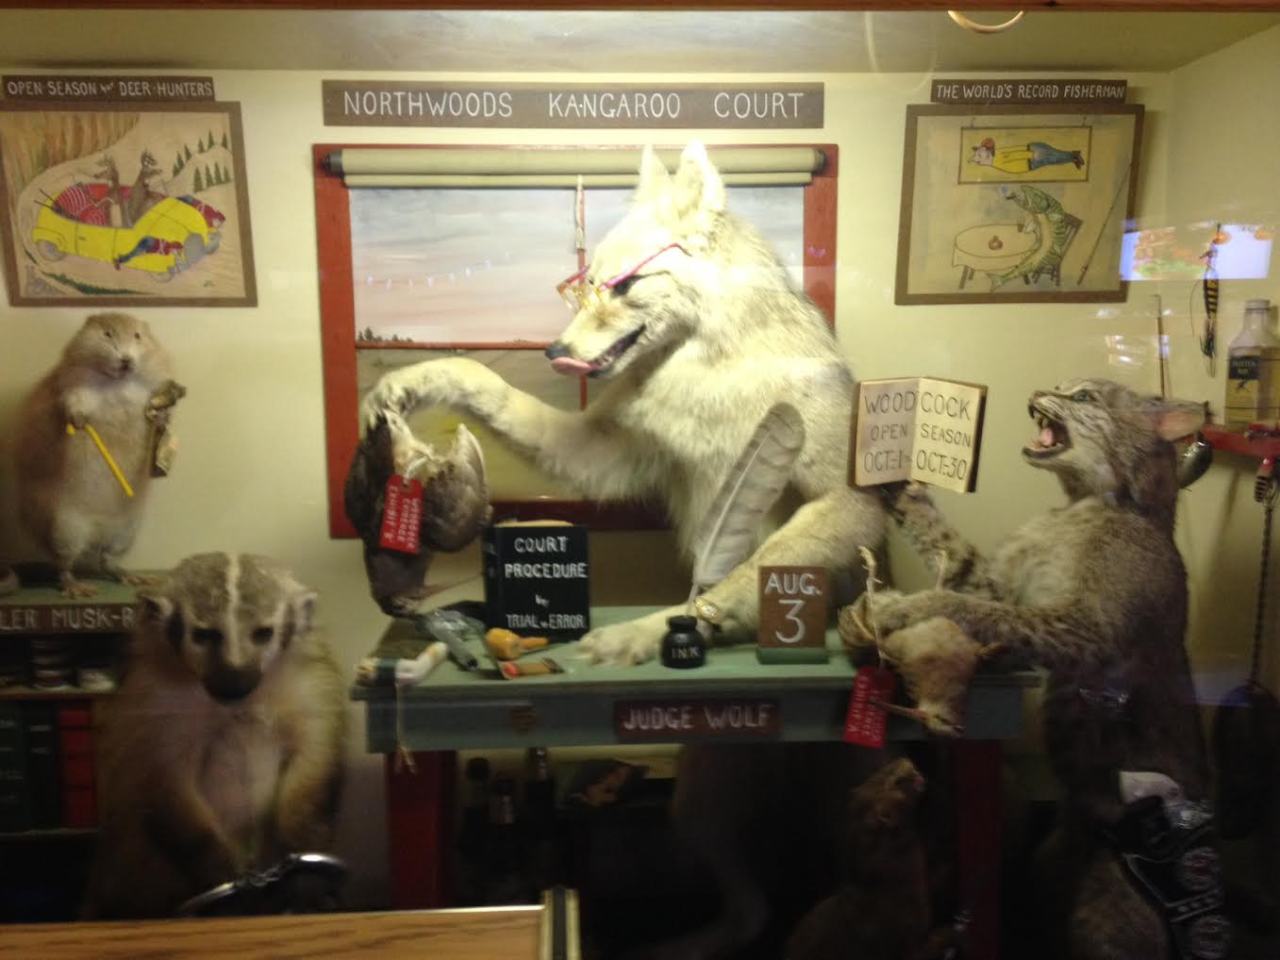 Kangaroo Court, featuring (from left to right) the plaintiff “Squealer Muskrat,” defendant “Sulky Badger,” “Judge Wolf” and I believe that the lynx is a prosecutor presenting evidence.
One of the most fabulous tableaus I’ve ever seen.
Submitted by...